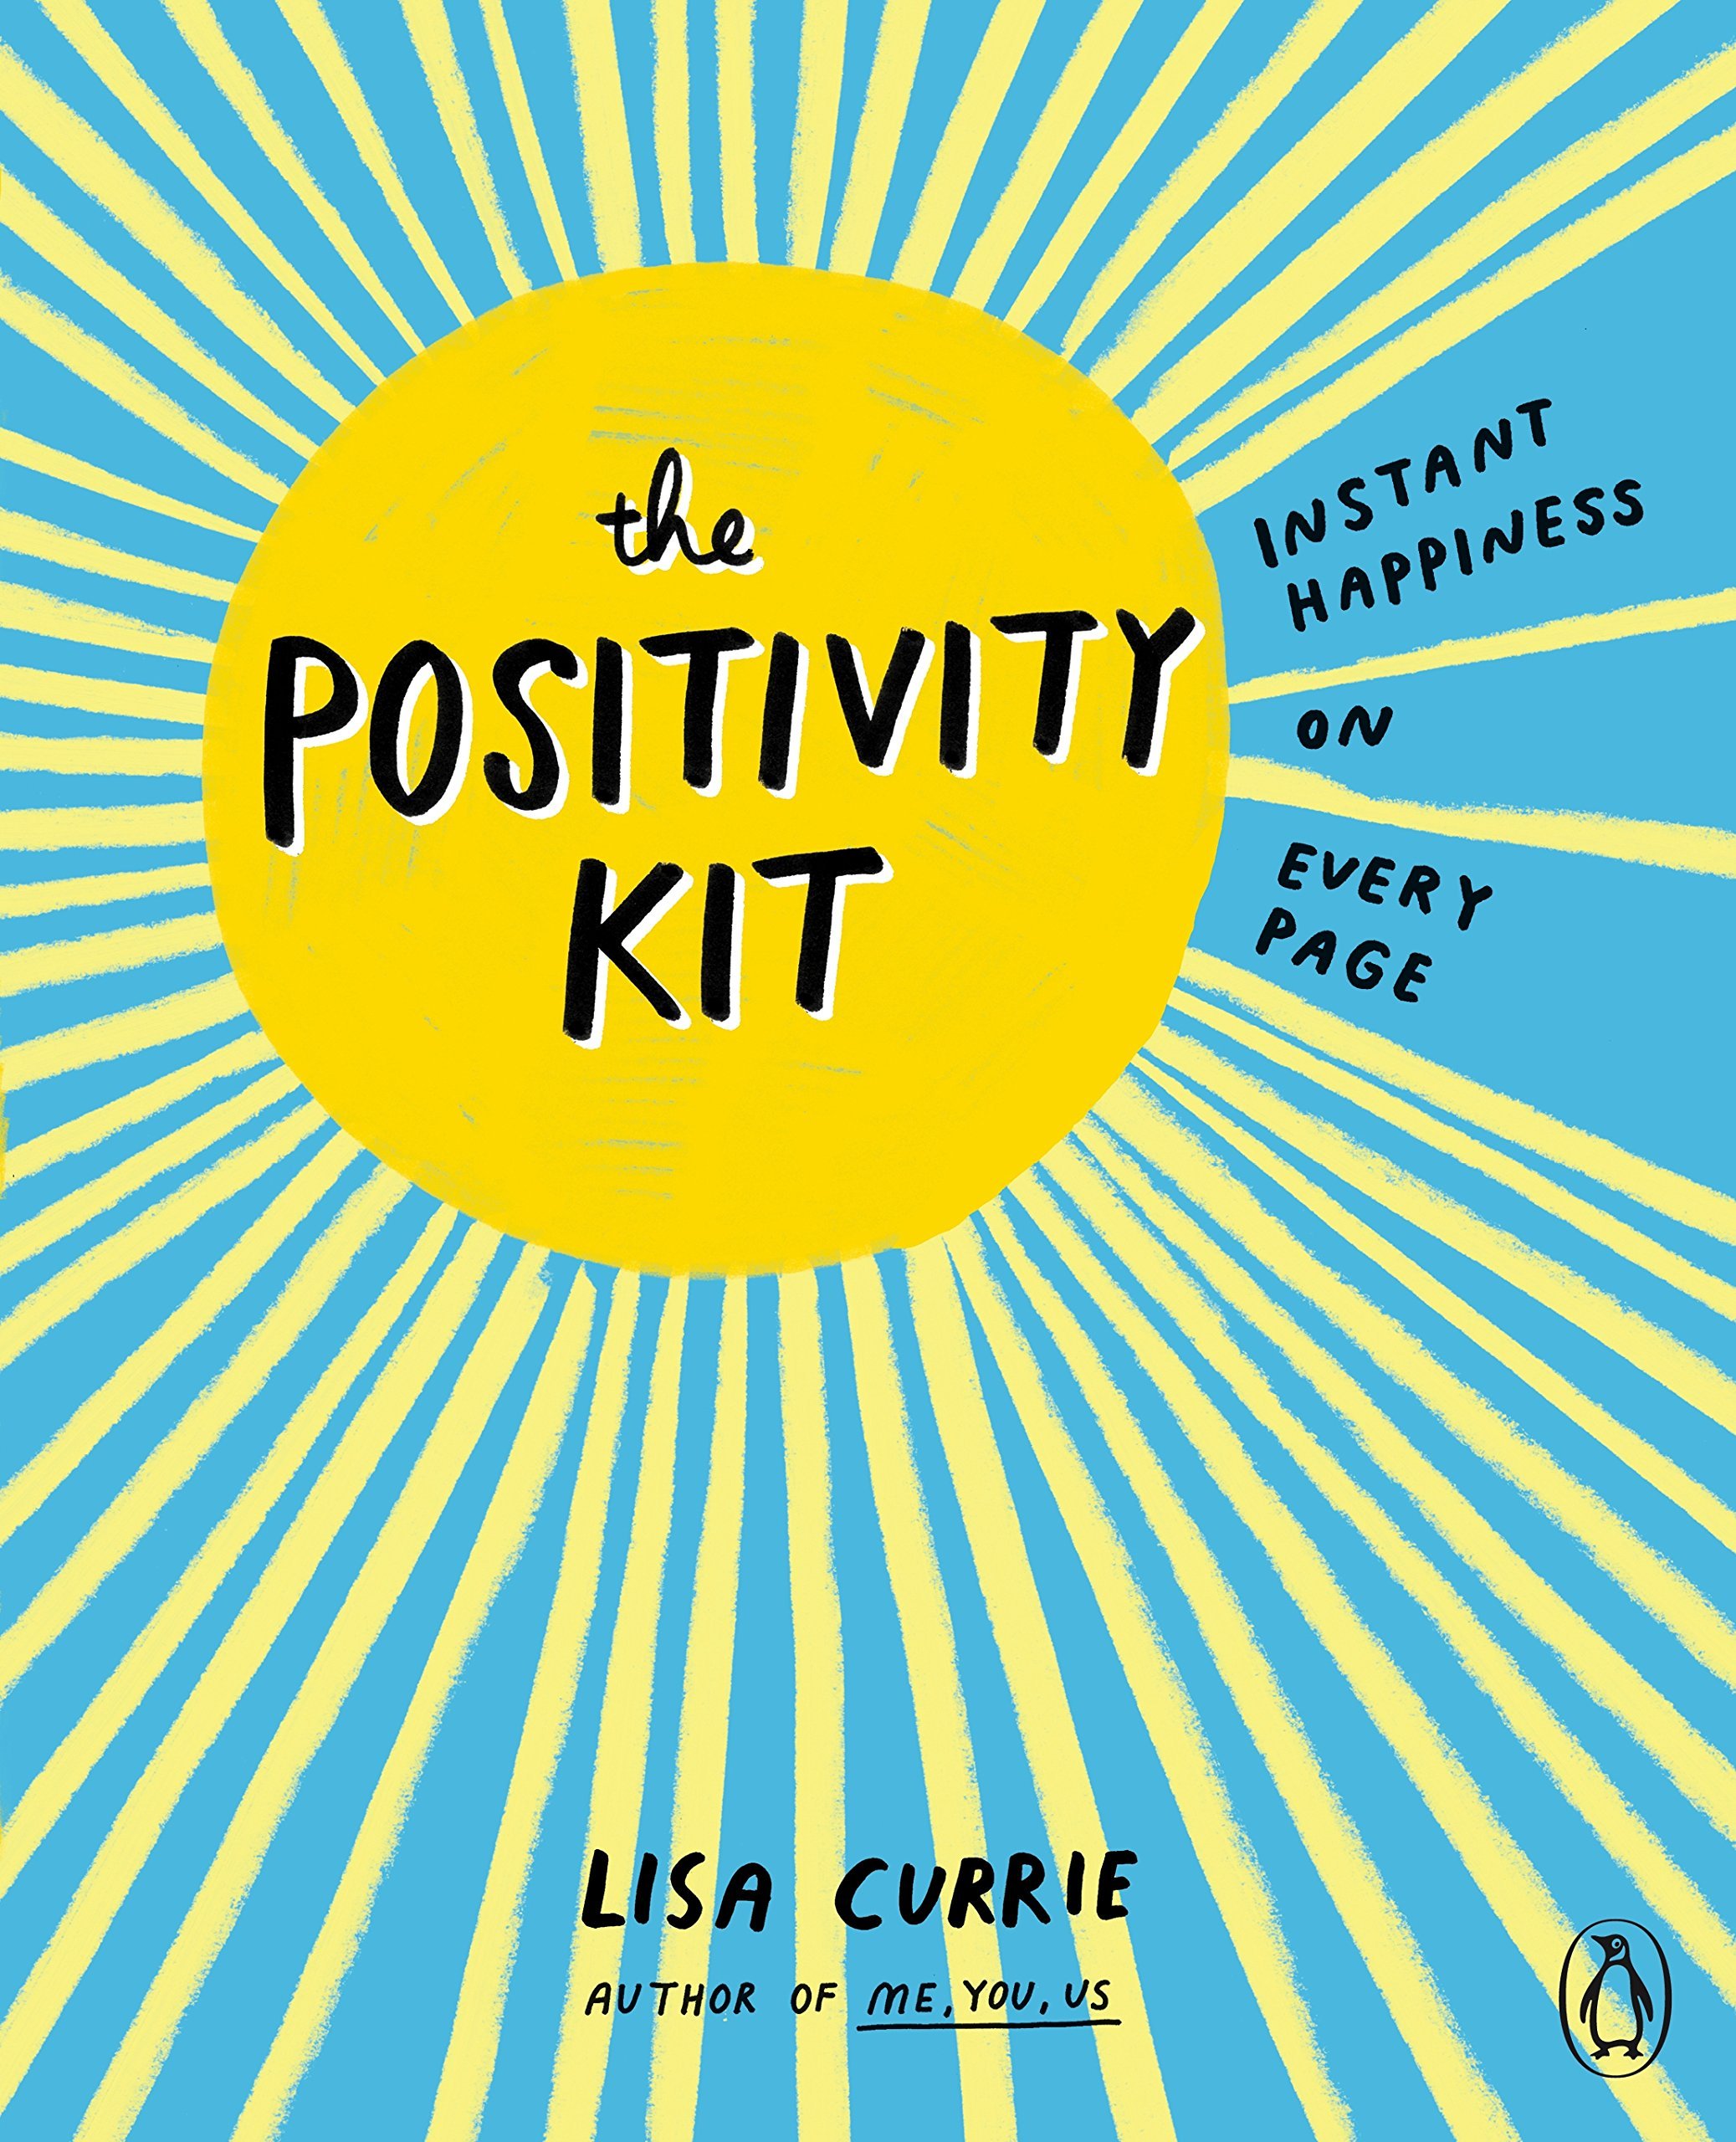 after-surgery-gifts-for-her-positivity-kit